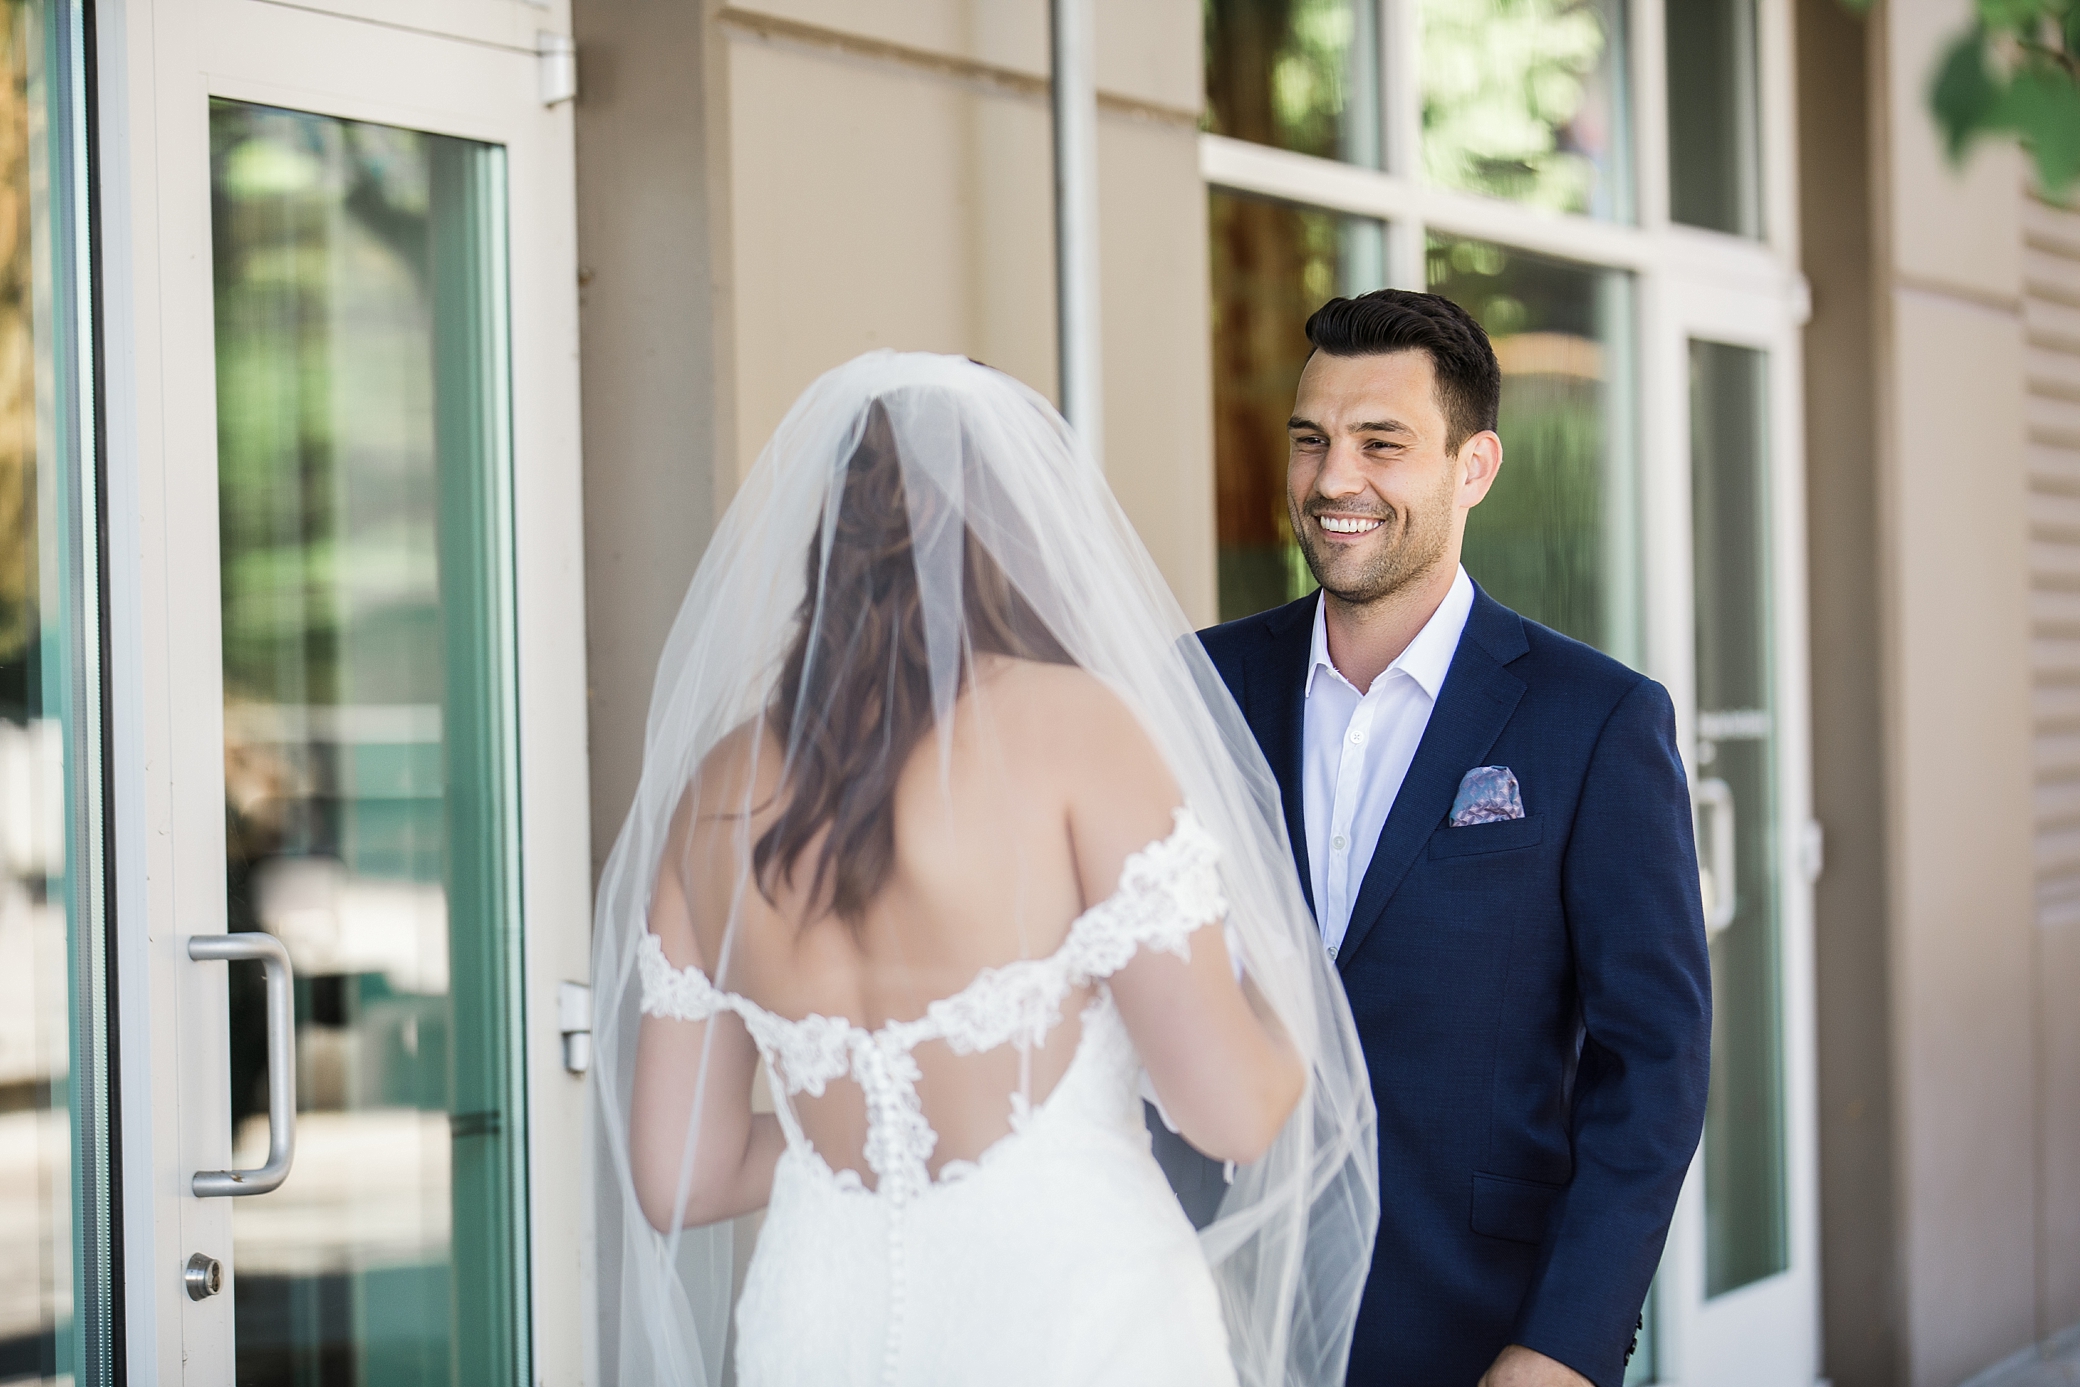 Downtown Tacoma wedding photographed by Megan Montalvo Photography 